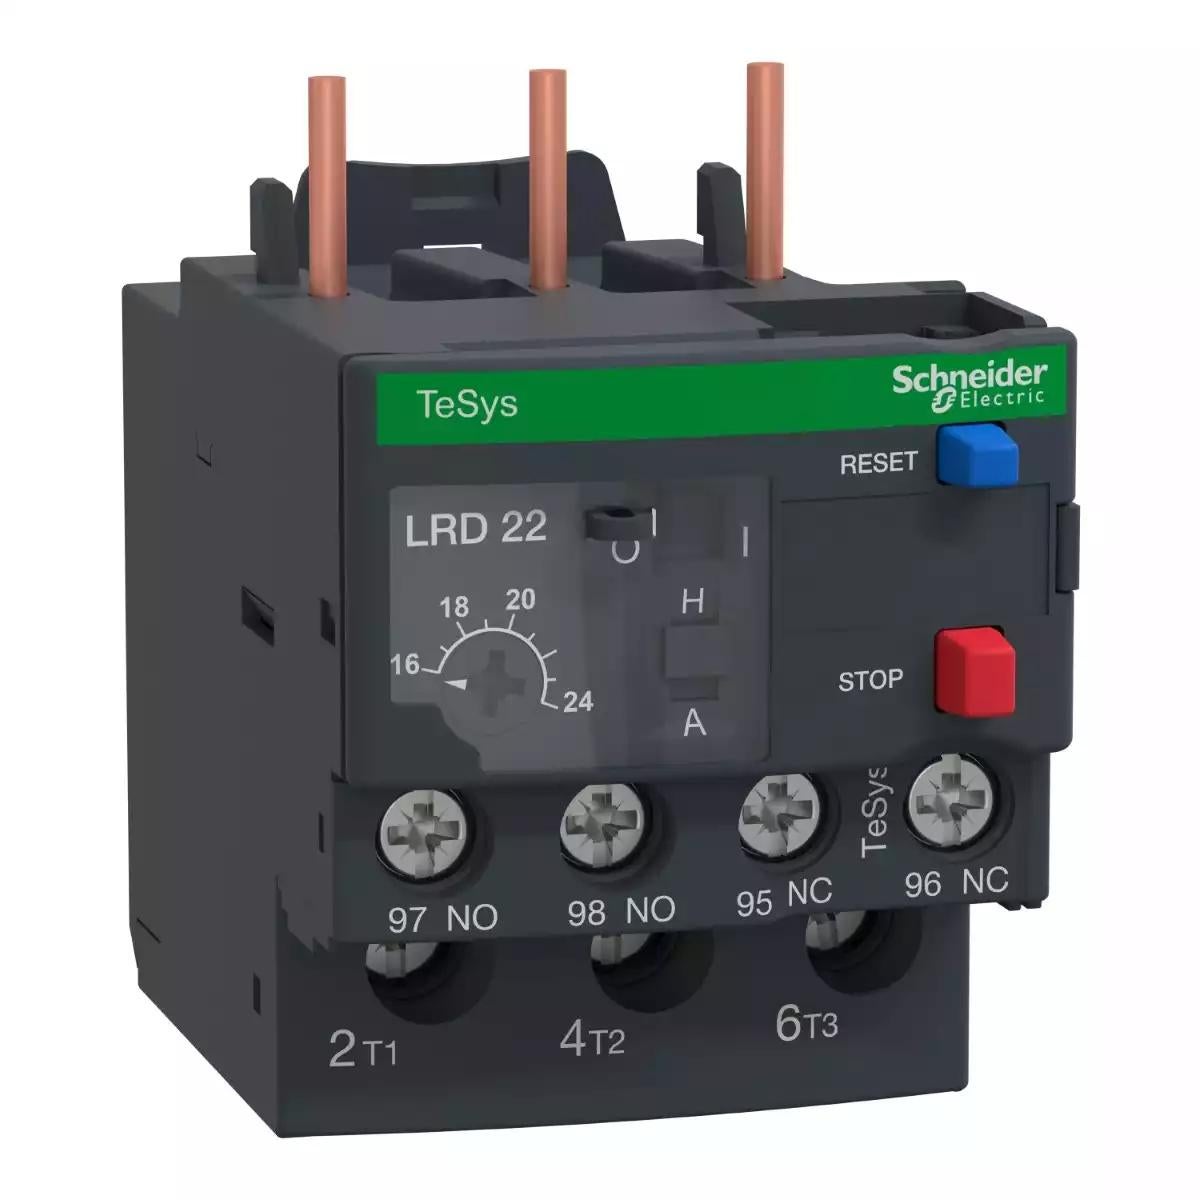 Thermal overload relay,TeSys Deca,16-24A,1NO+1NC,class 10A,lugs ring terminal